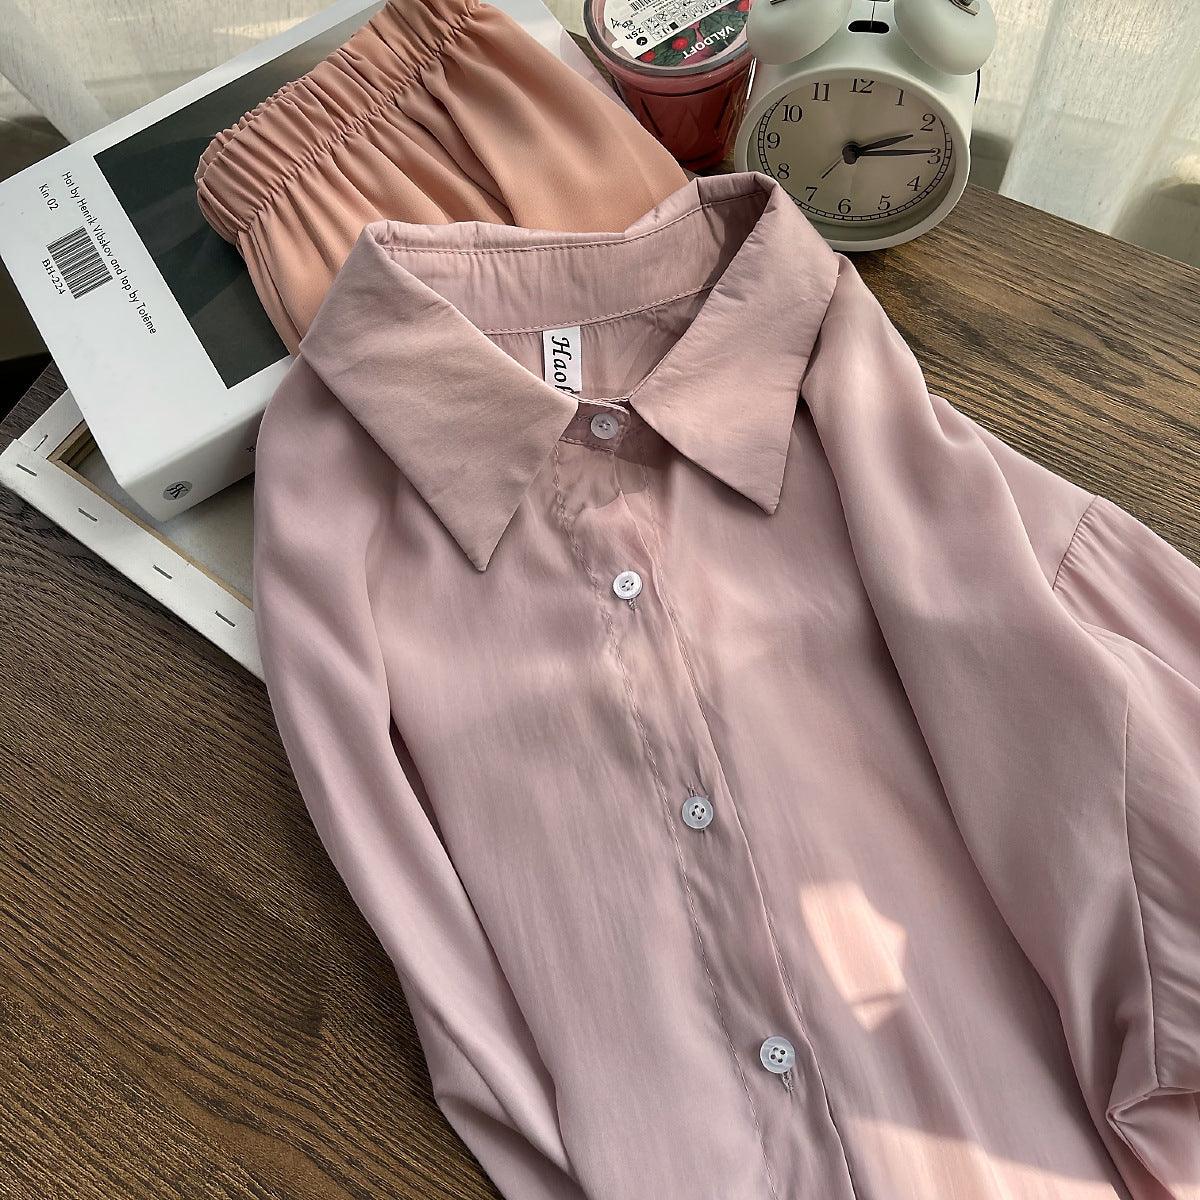 Women's Solid Color Button Down Shirt with Long Sleeves - Dusty Rose One size